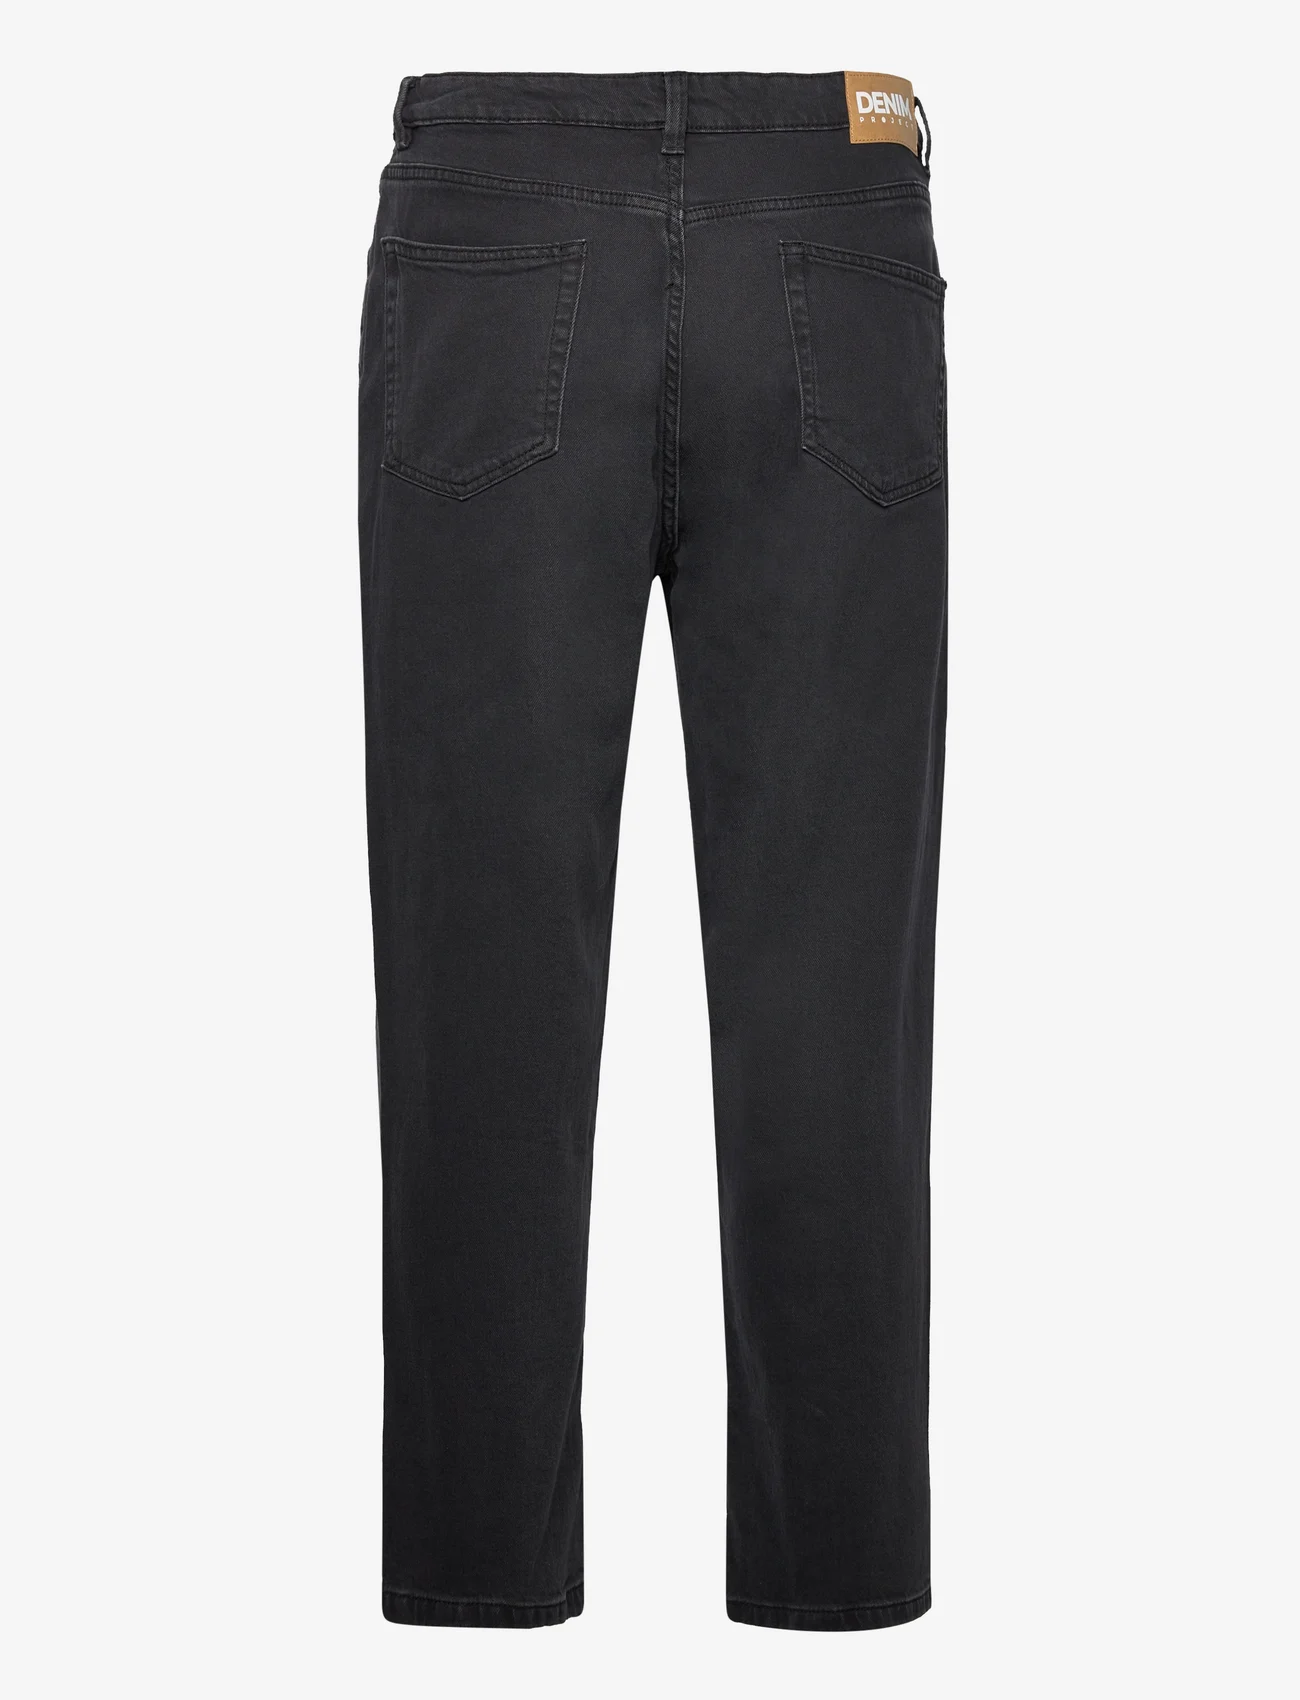 Denim project - DPChicago Tapered Recycled Jeans - džinsi - black - 1